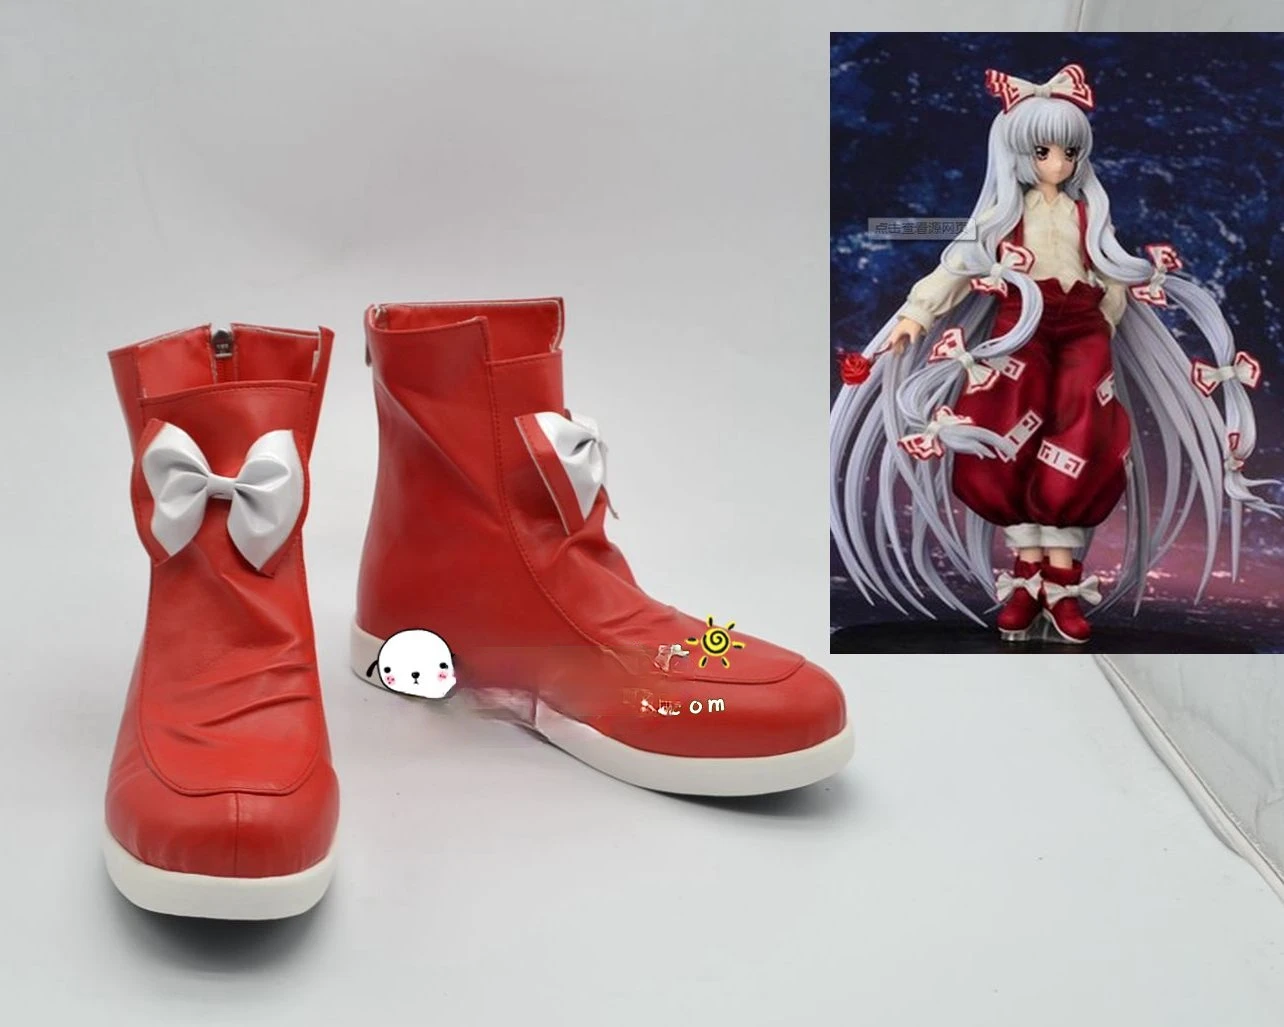 Touhou Project/Toho Project/Project Shrine Maiden Fujiwara no Mokou Anime Characters Shoe Cosplay Shoes Boots Party Costume Prop